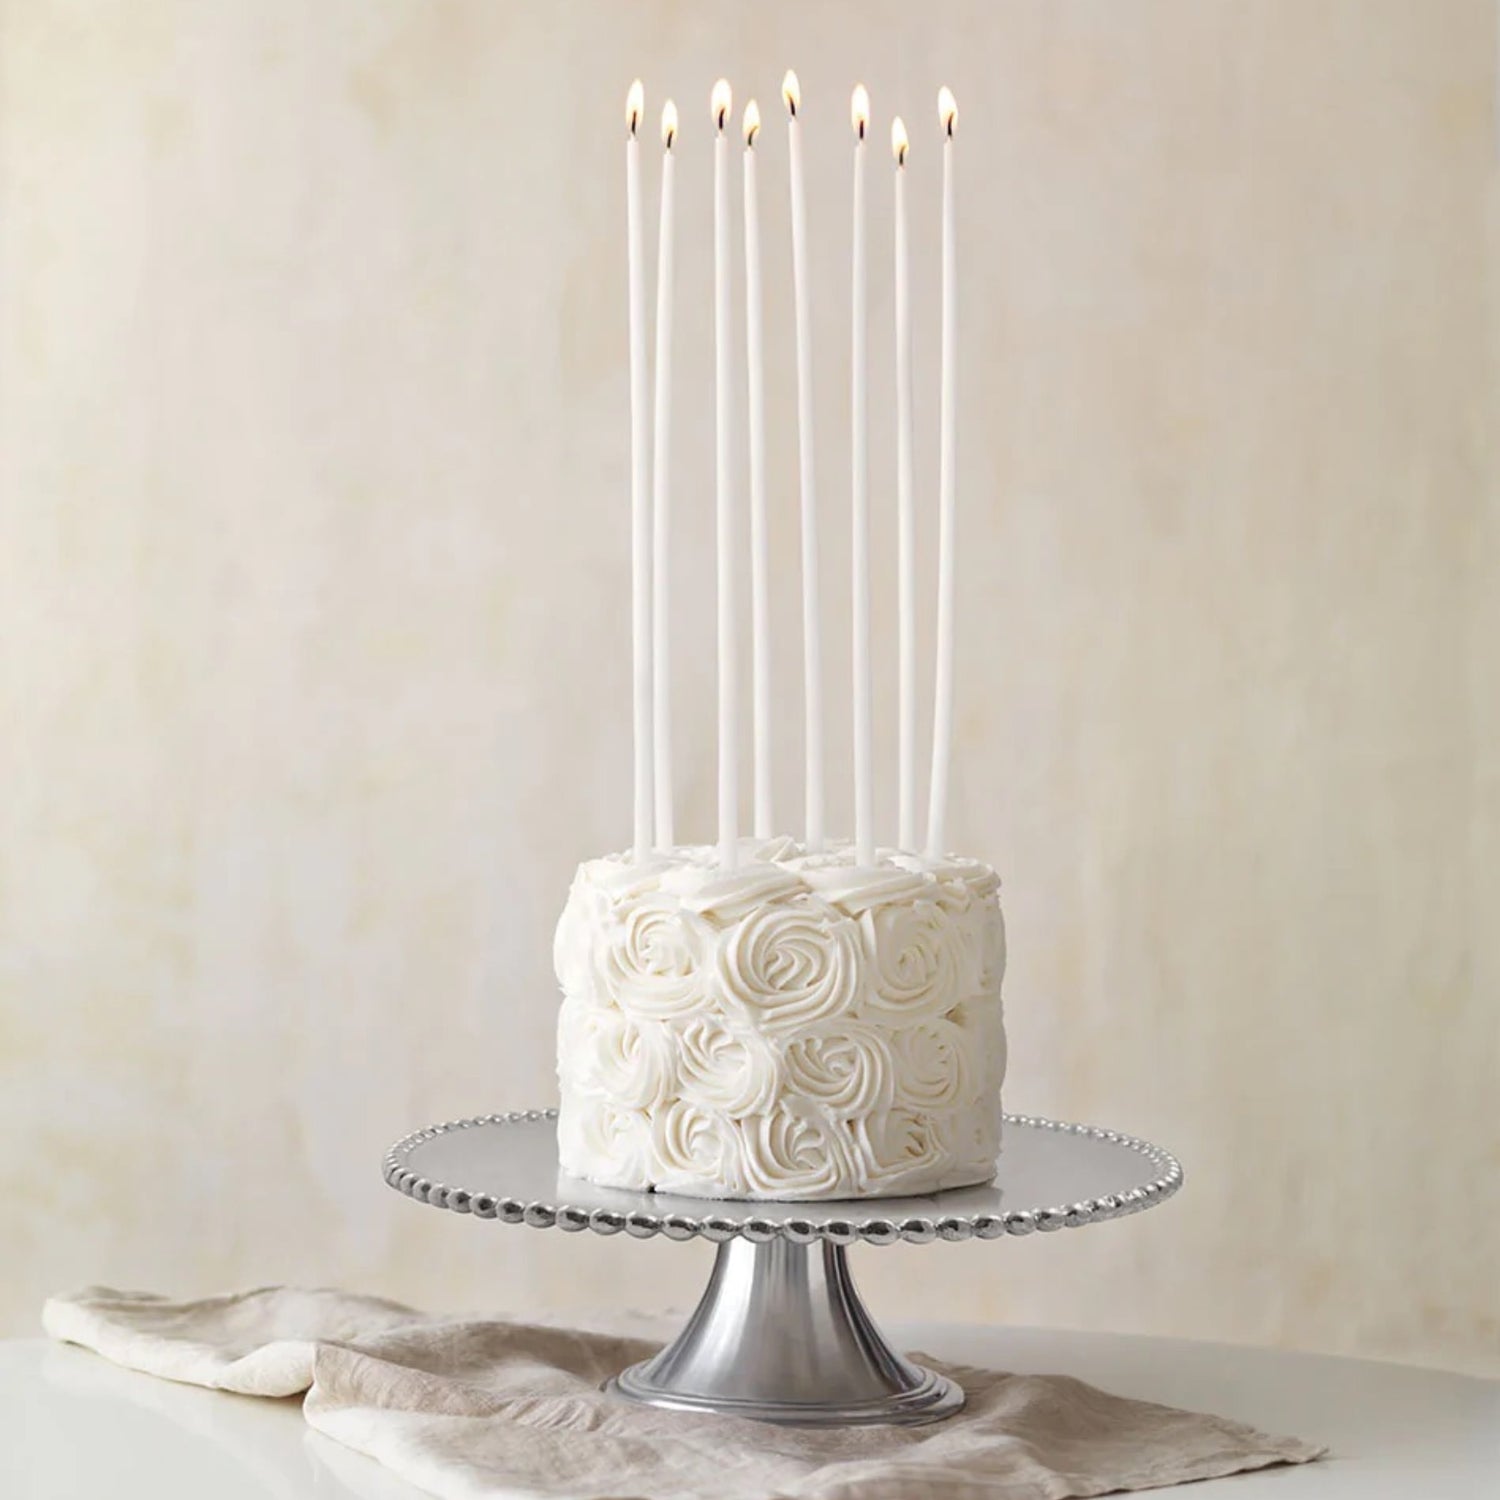 white cake with very long candles in it